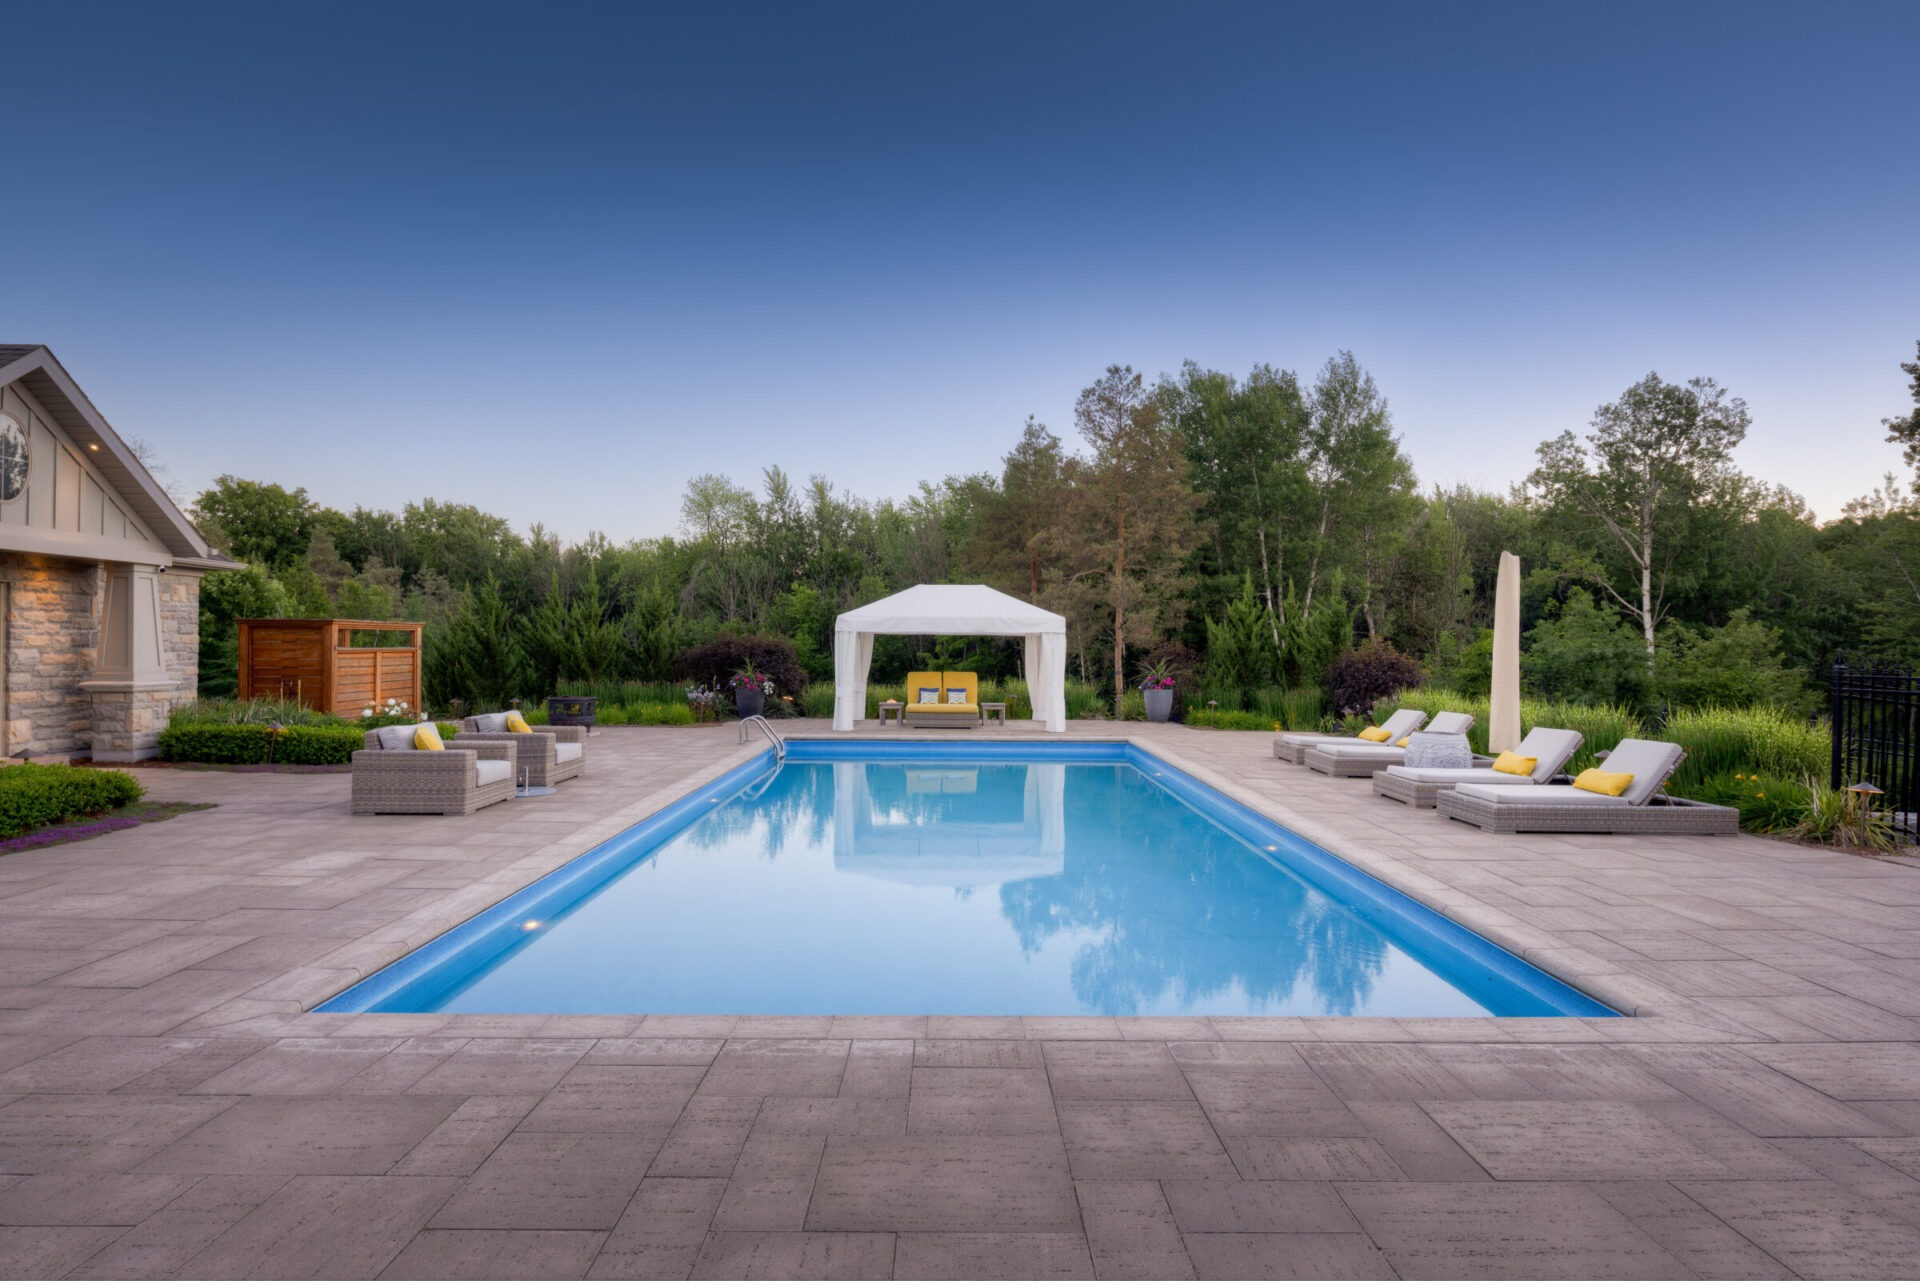 An outdoor swimming pool with a gazebo, lounge chairs, surrounding greenery, and a stone patio during twilight in a tranquil backyard setting.